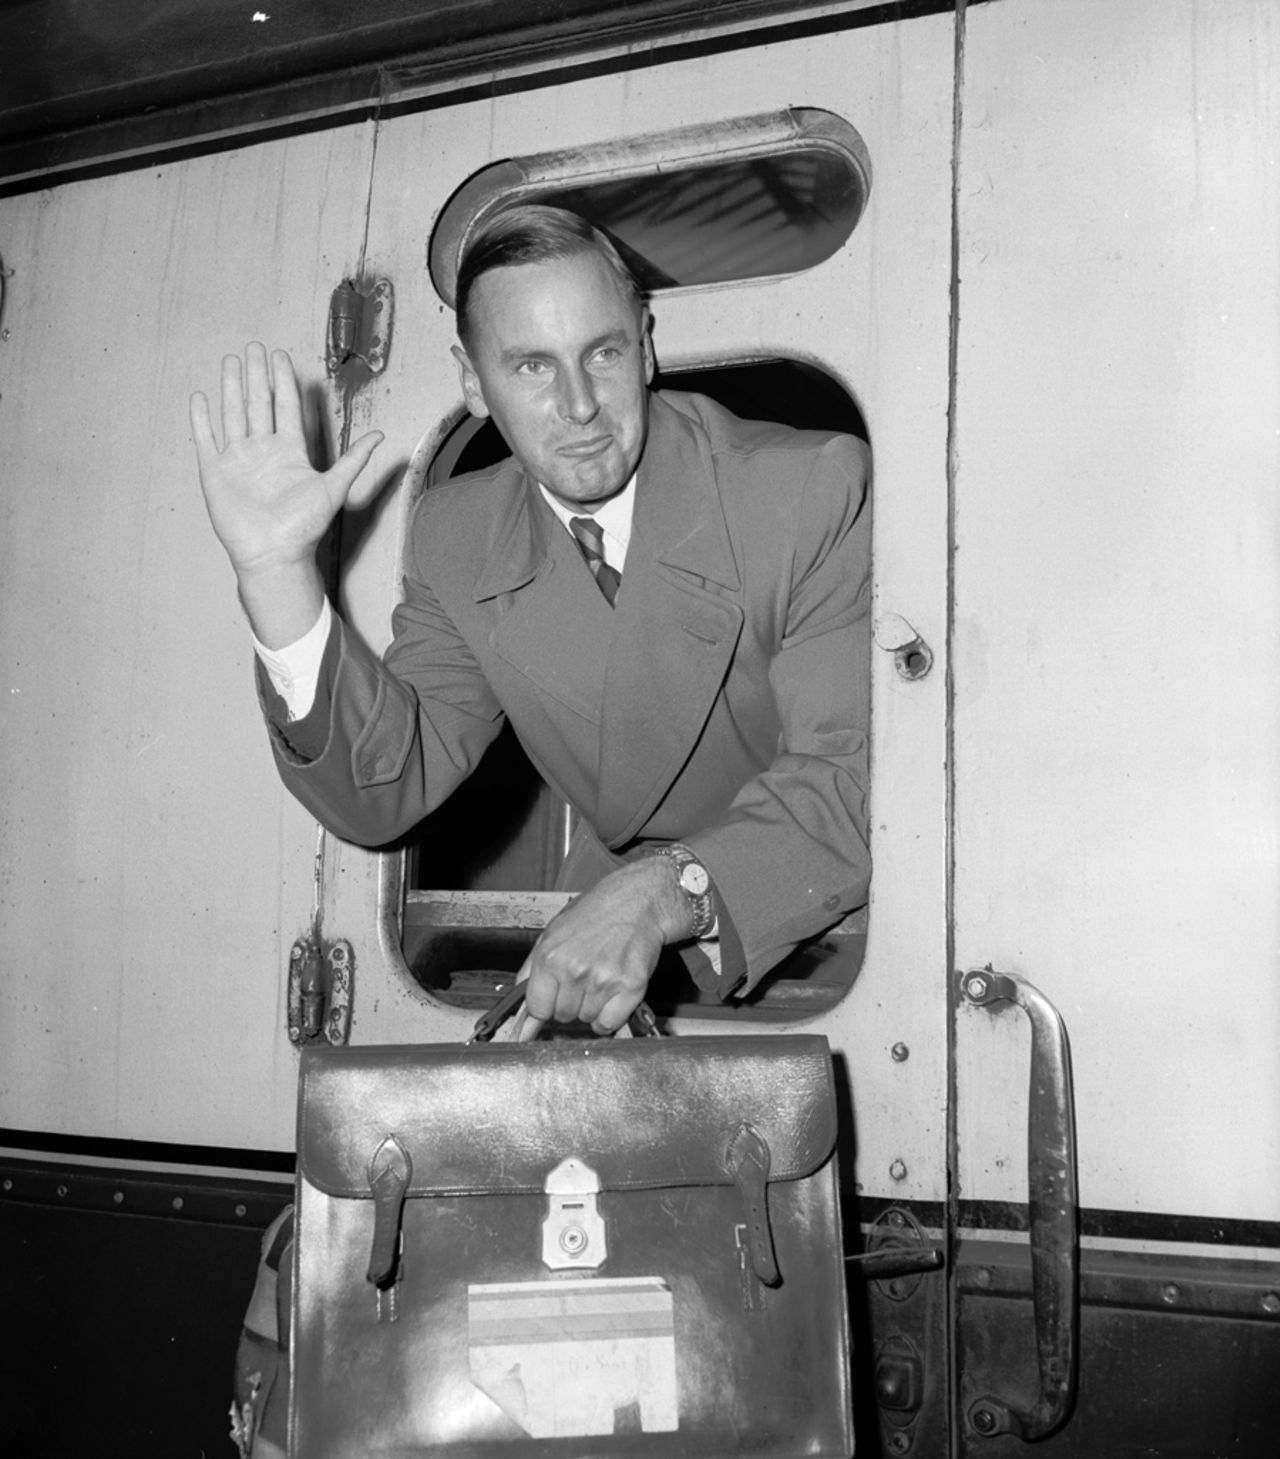 Peter May arrives back from South Africa, Waterloo station, London, March 29, 1957